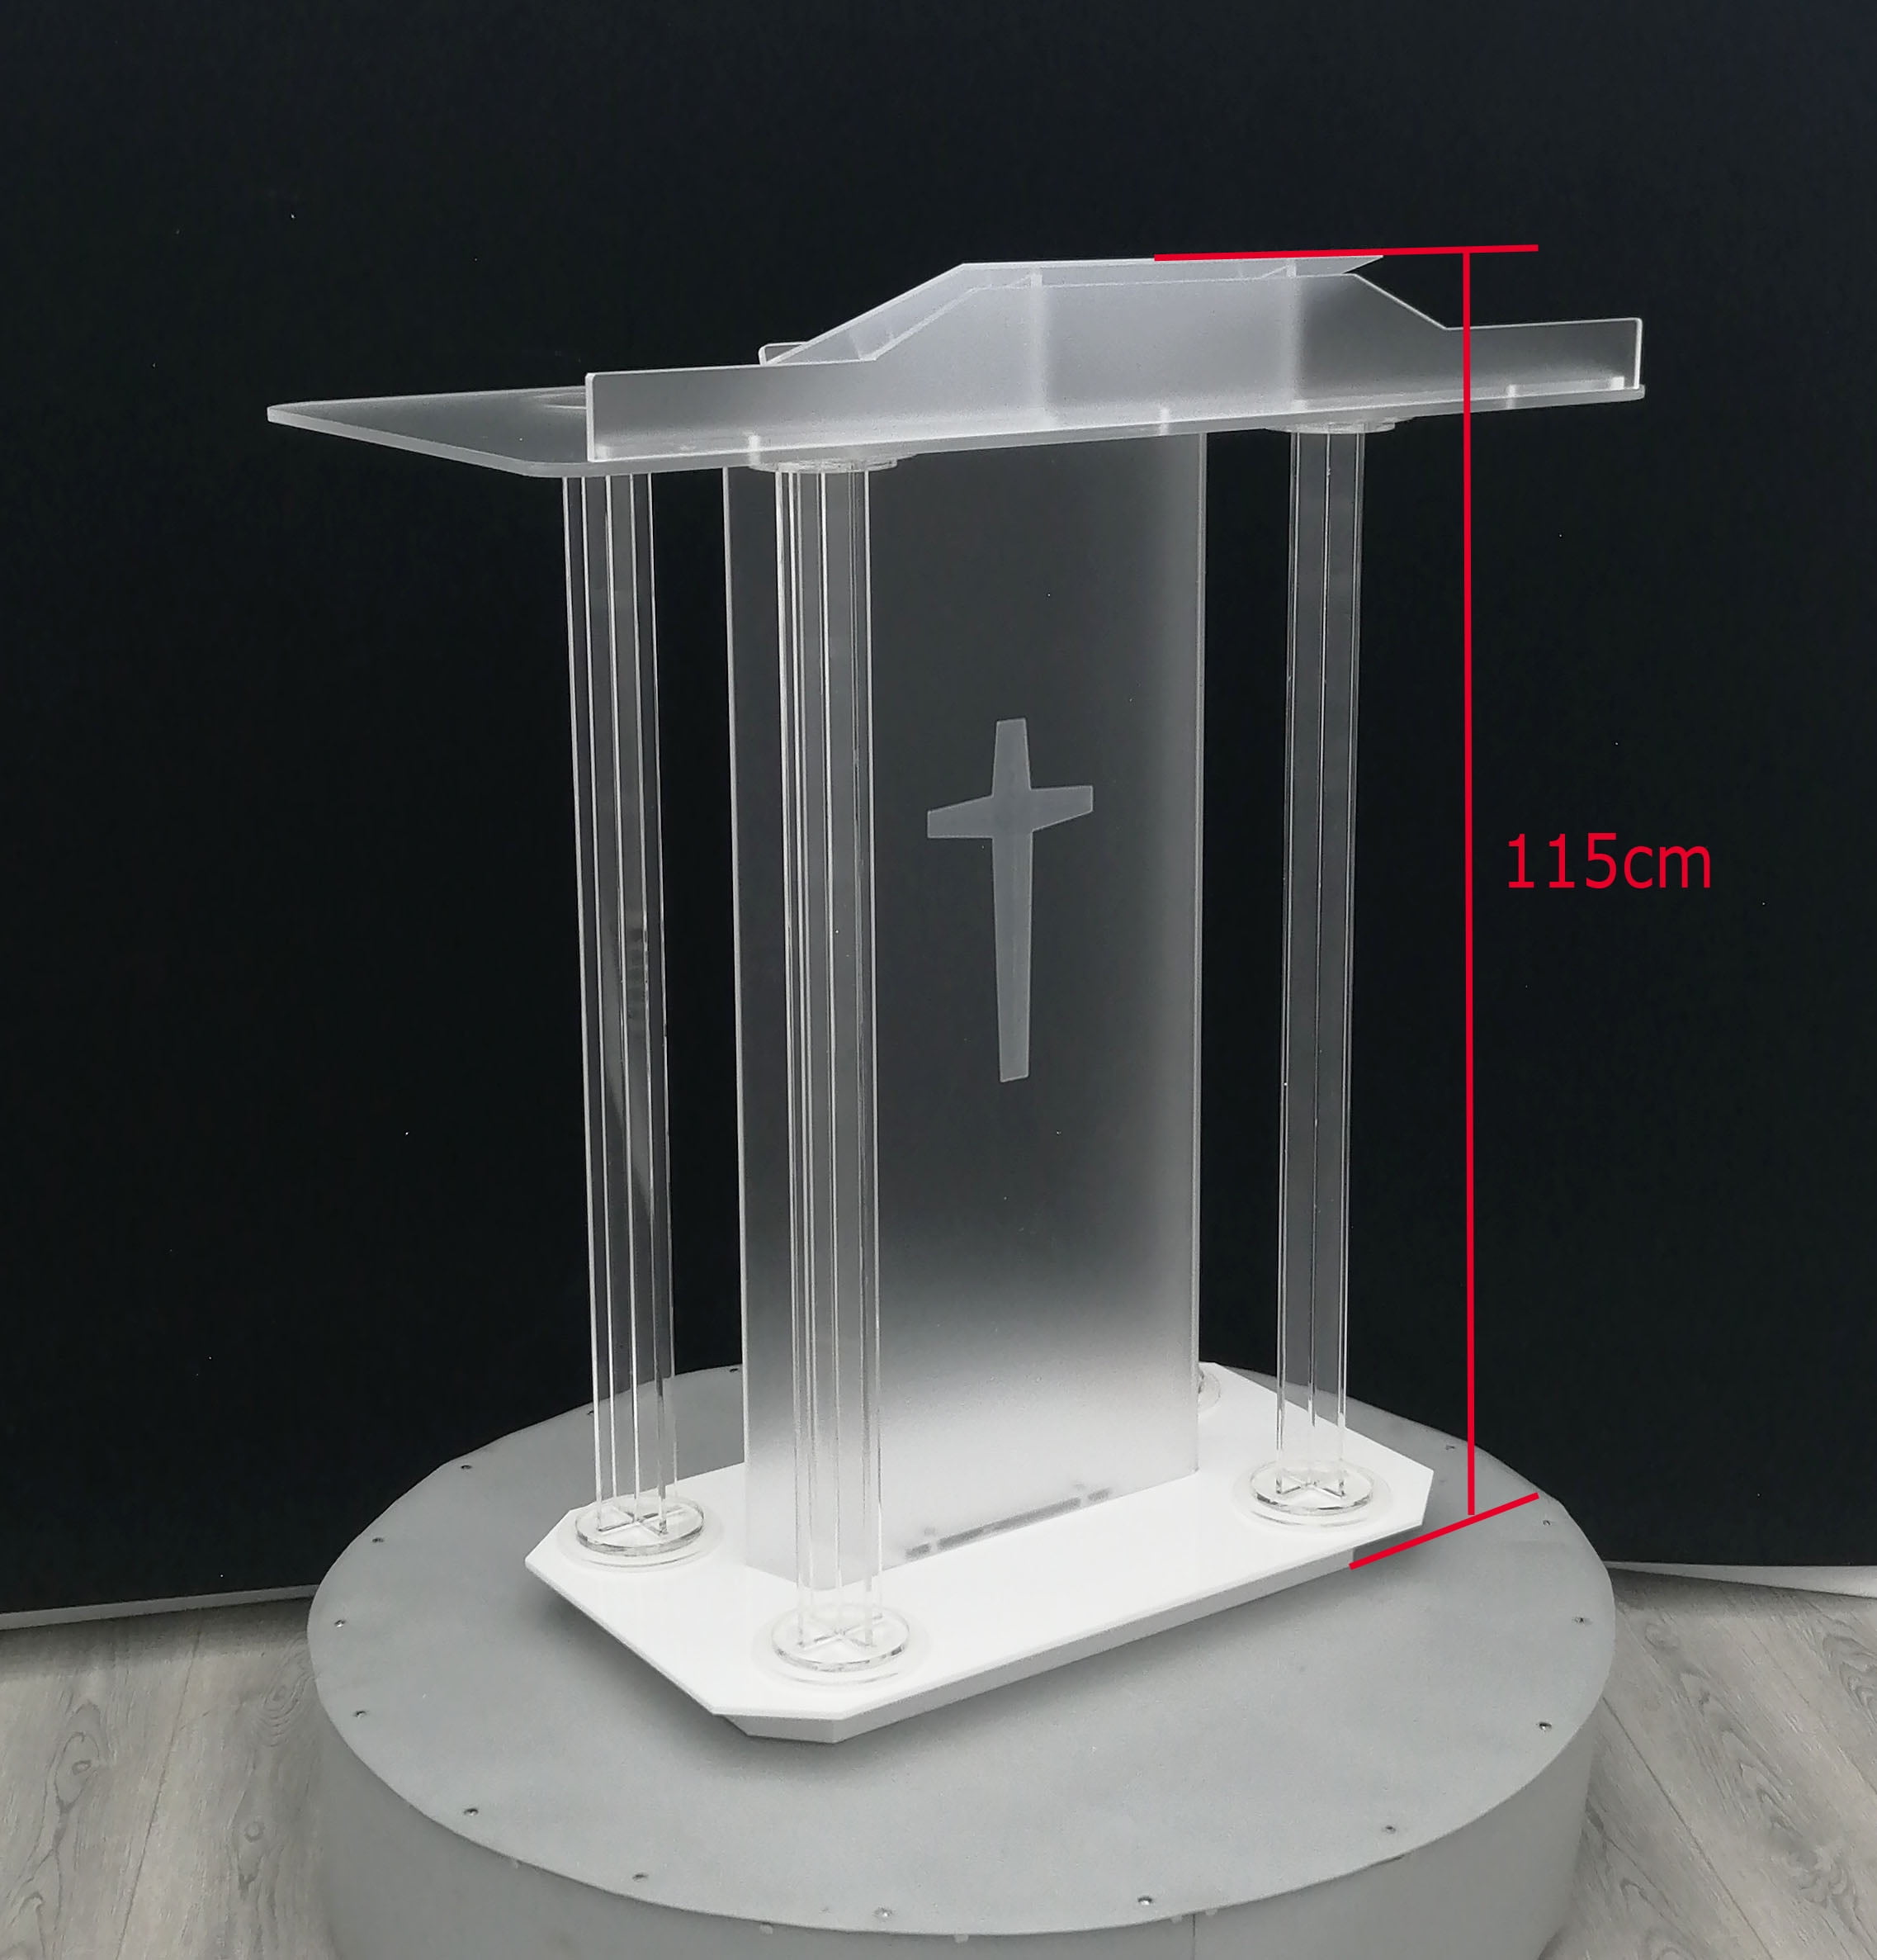 TECHTONGDA Black Podium Stand Acrylic Pulpits Plexiglass Church Lectern for Restaurants Weddings Office and Classrooms 